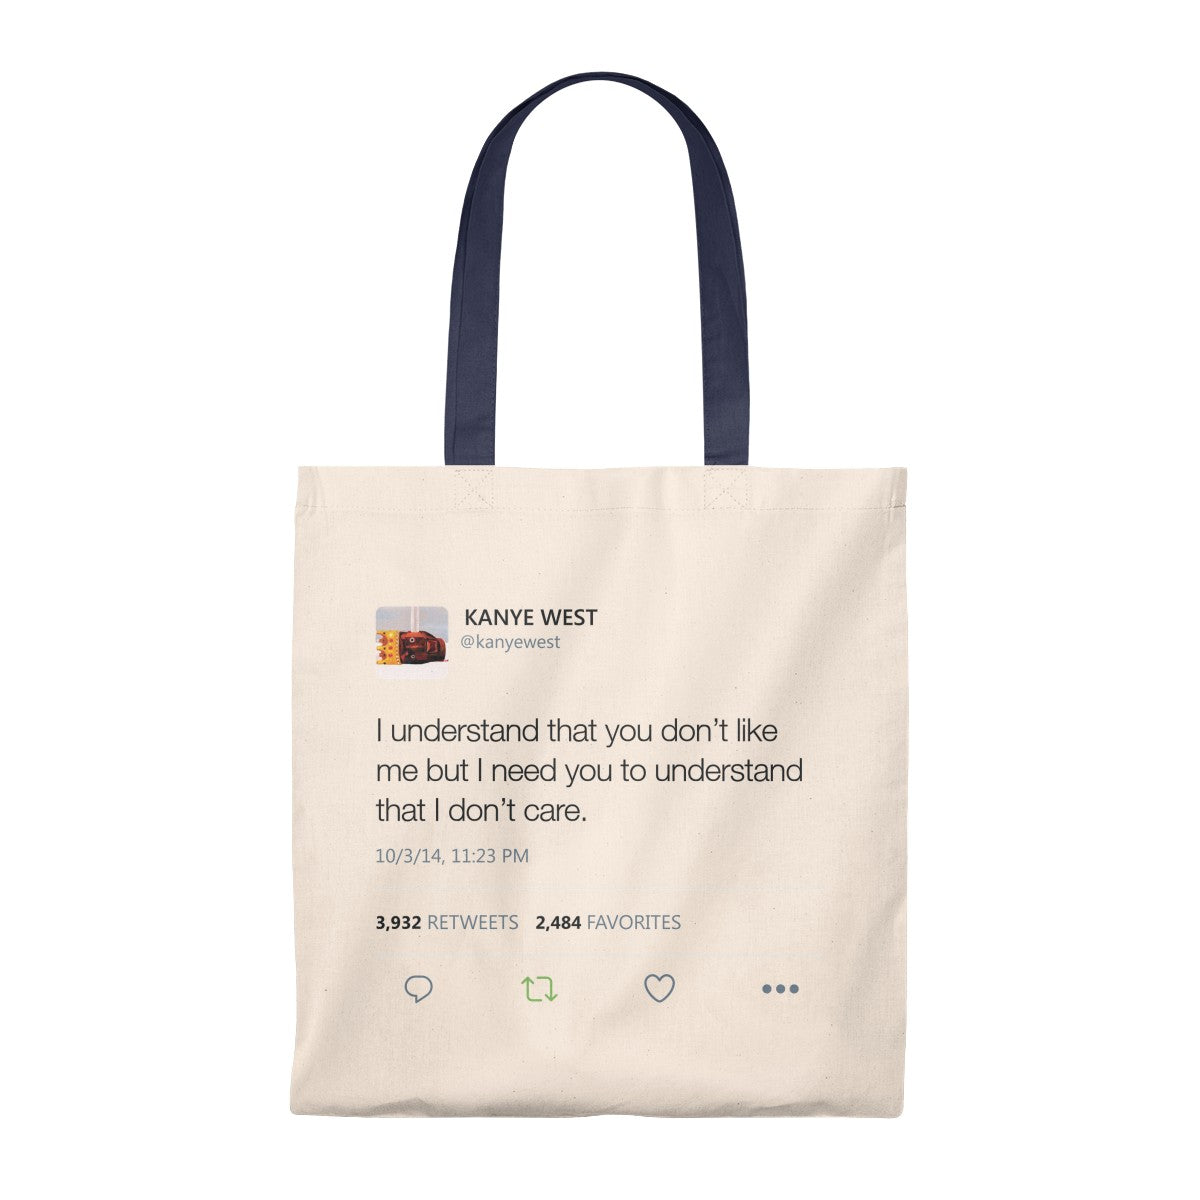 I Understand That You Don't Like Me But I Need You To Understand That I DonT Care Kanye West Tweet Tote Bag-Natural/Navy-Archethype